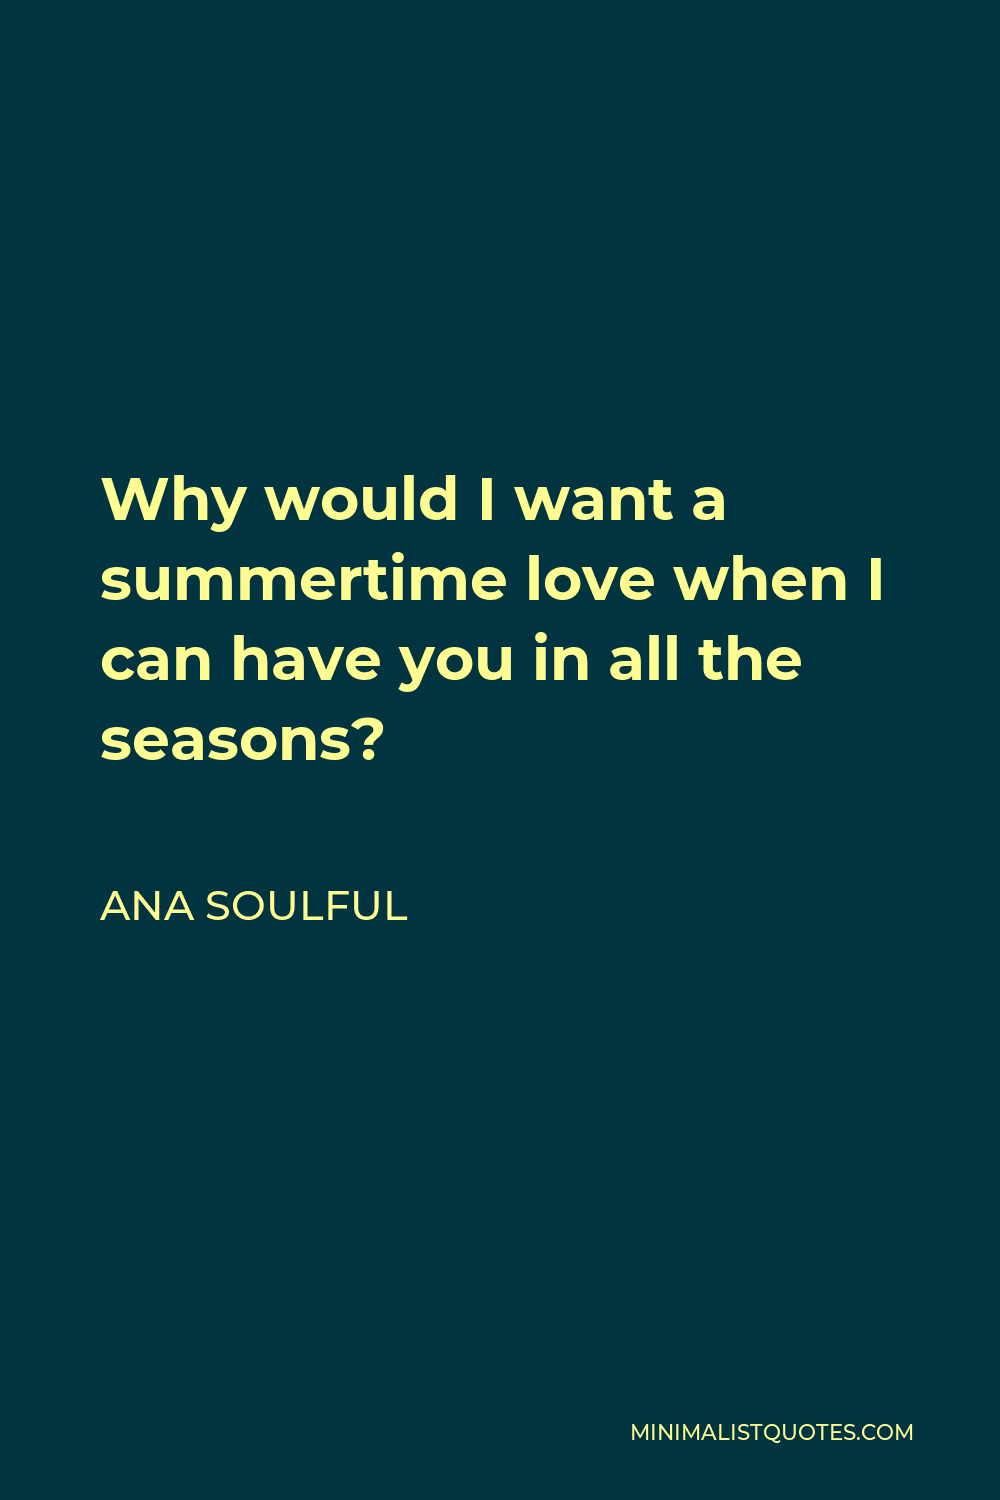 Ana Soulful Quote - Why would I want a summertime love when I can have you in all the seasons?